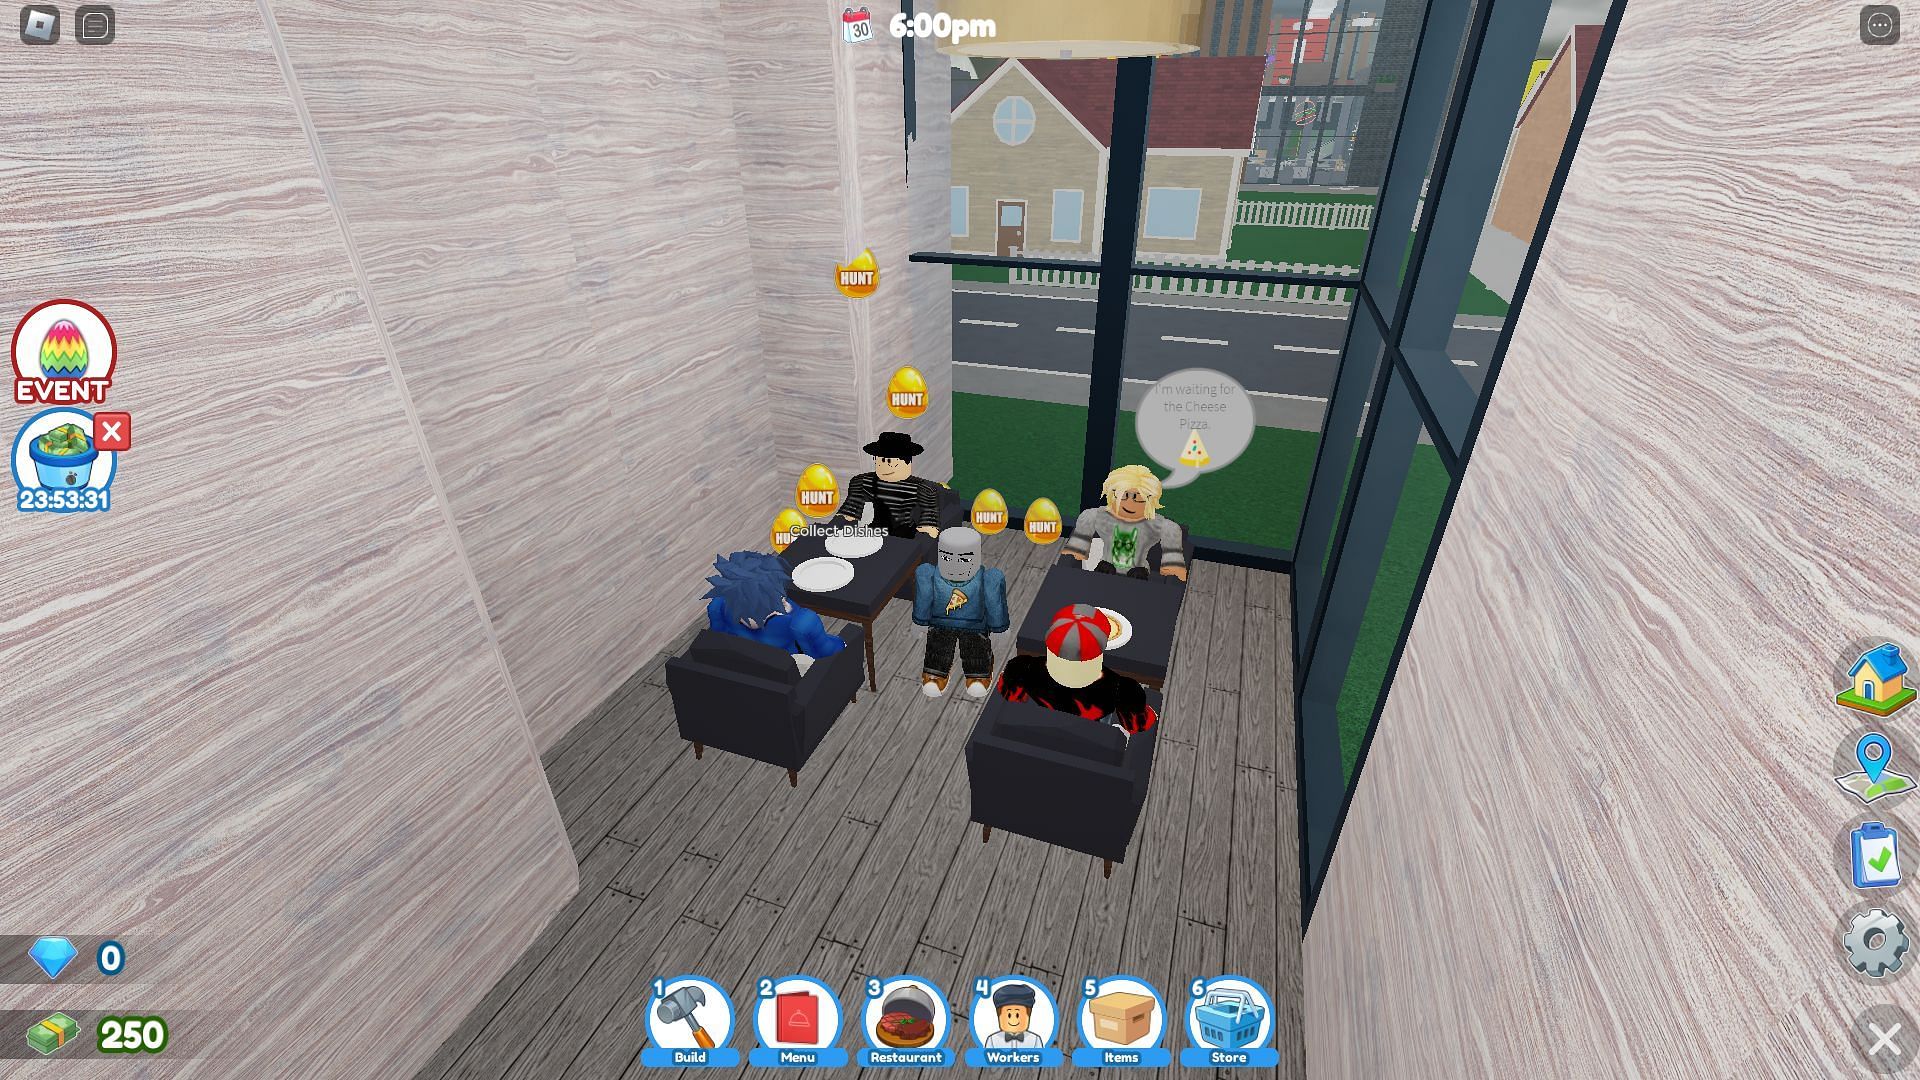 Golden eggs for The Hunt (Image via Roblox)